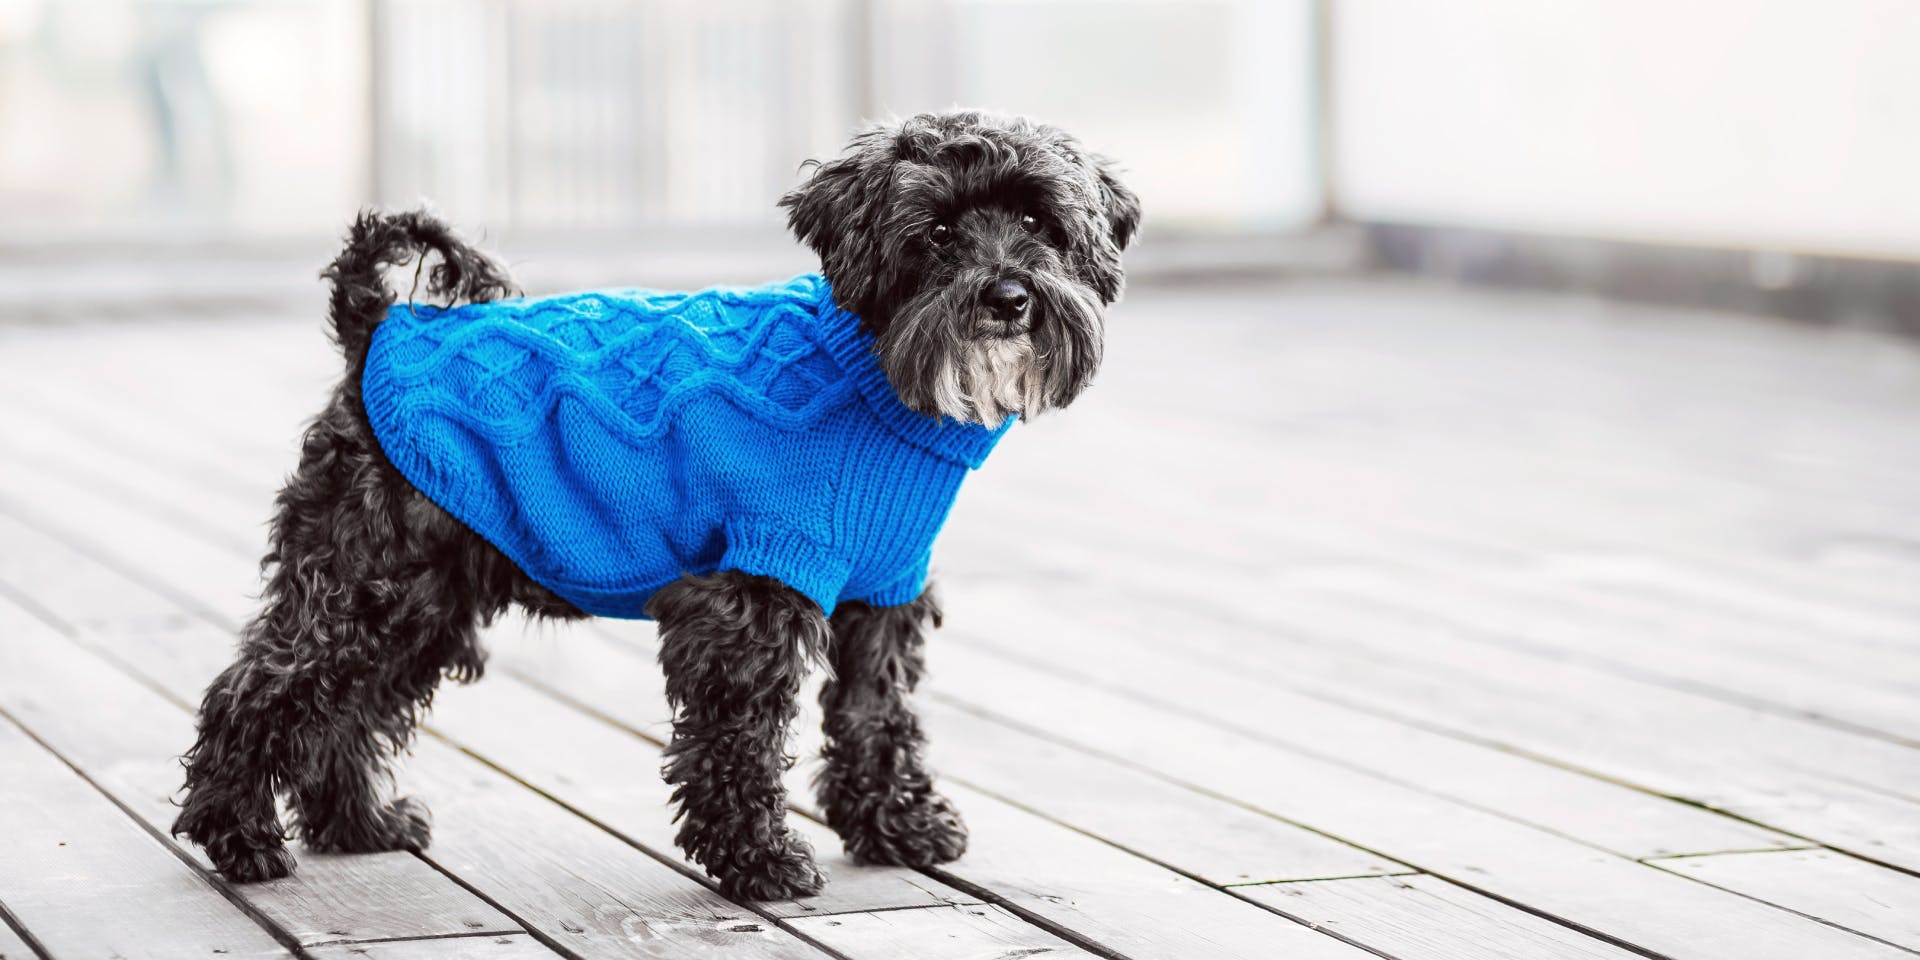 Dog with blue knitted sweater.